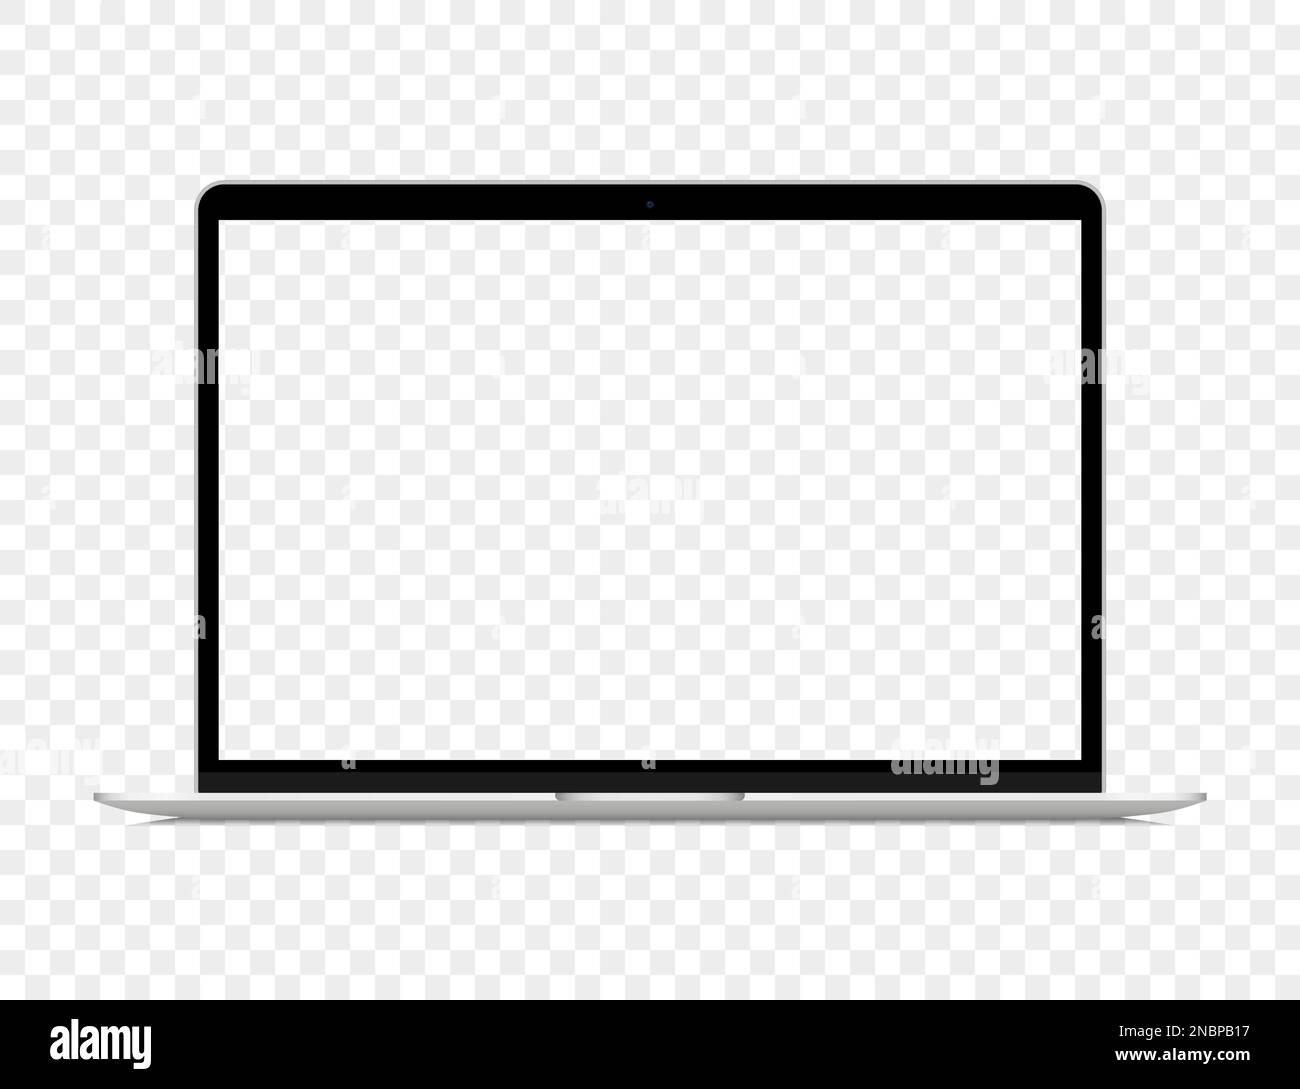 Realistic silver laptop with blank screen on a transparent background Stock Vector